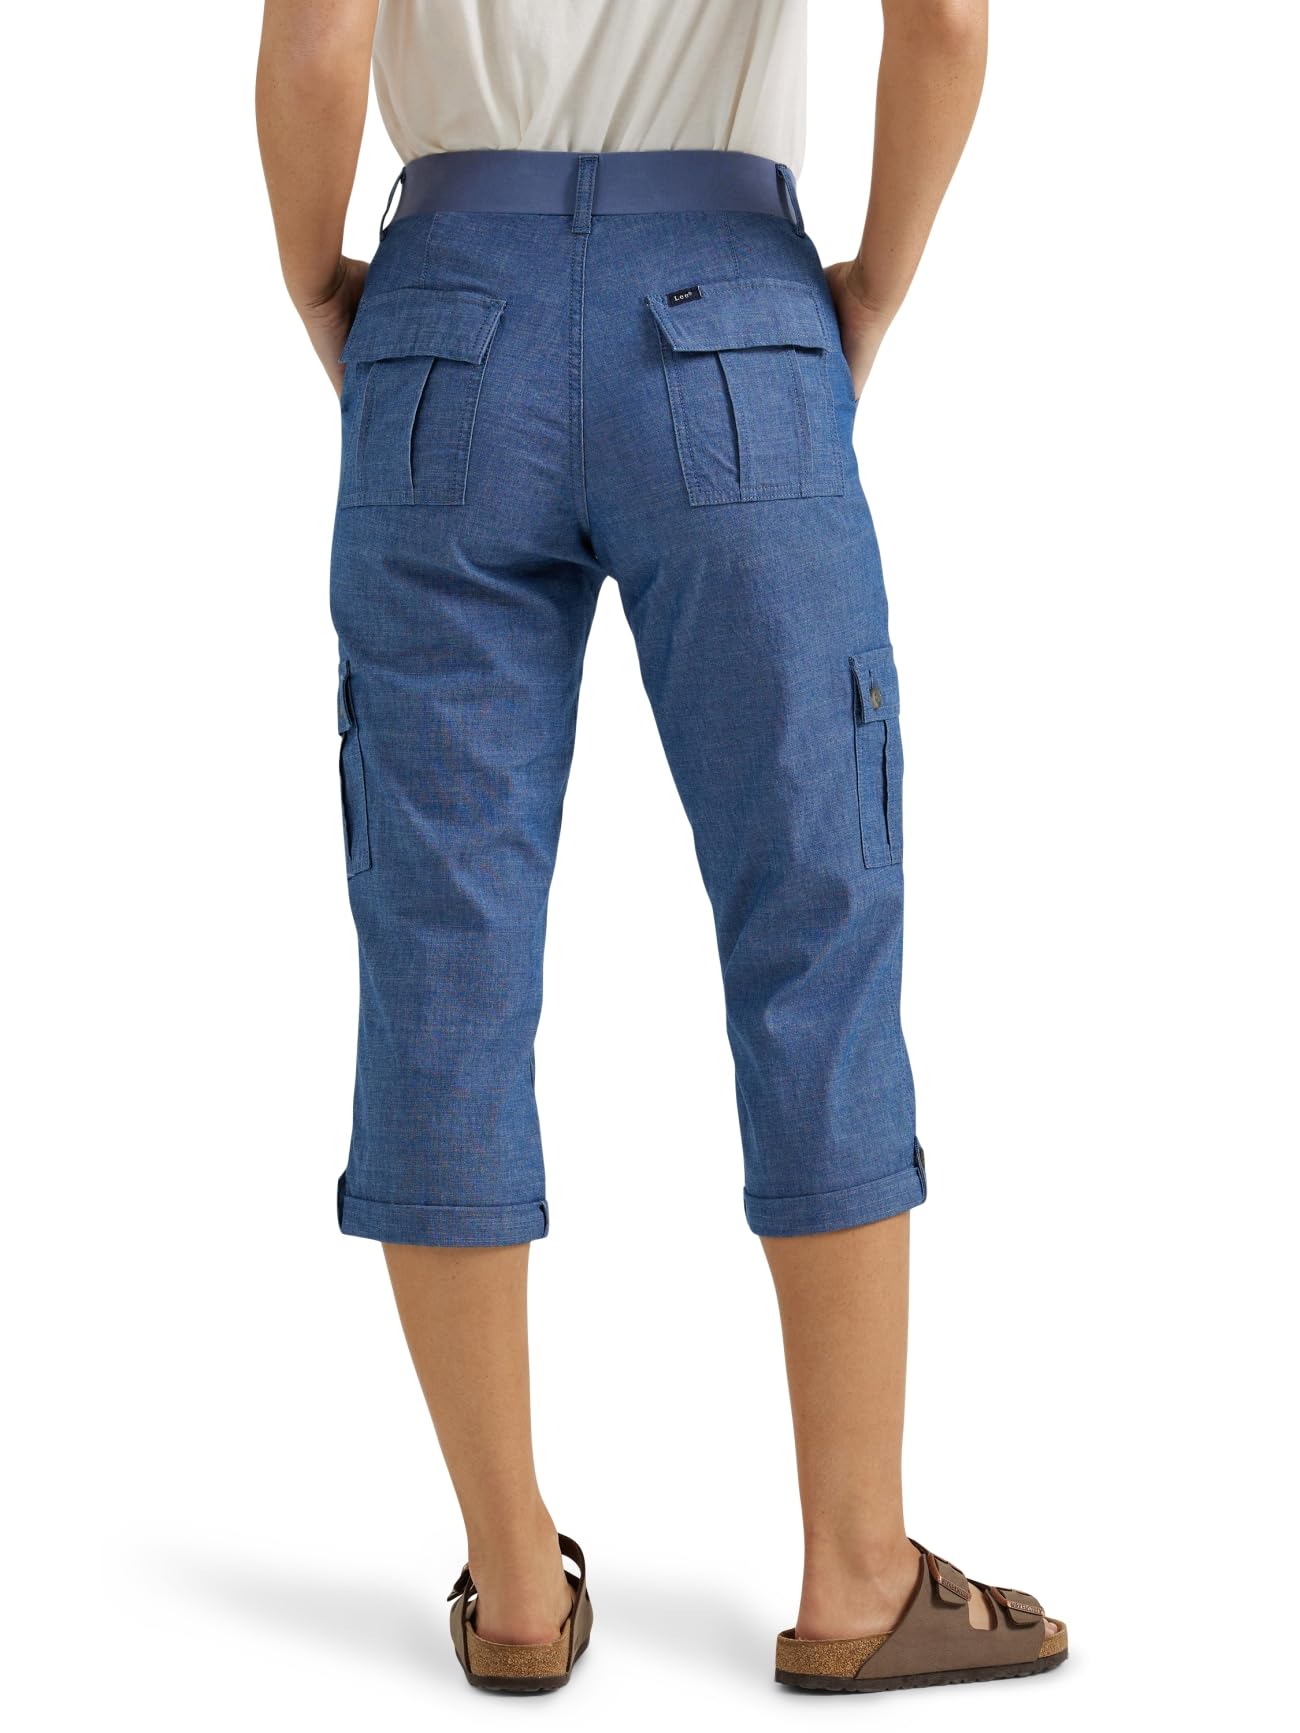 Lee Women's Ultra Lux Comfort with Flex-to-Go Cargo Capri Pant, Chambray